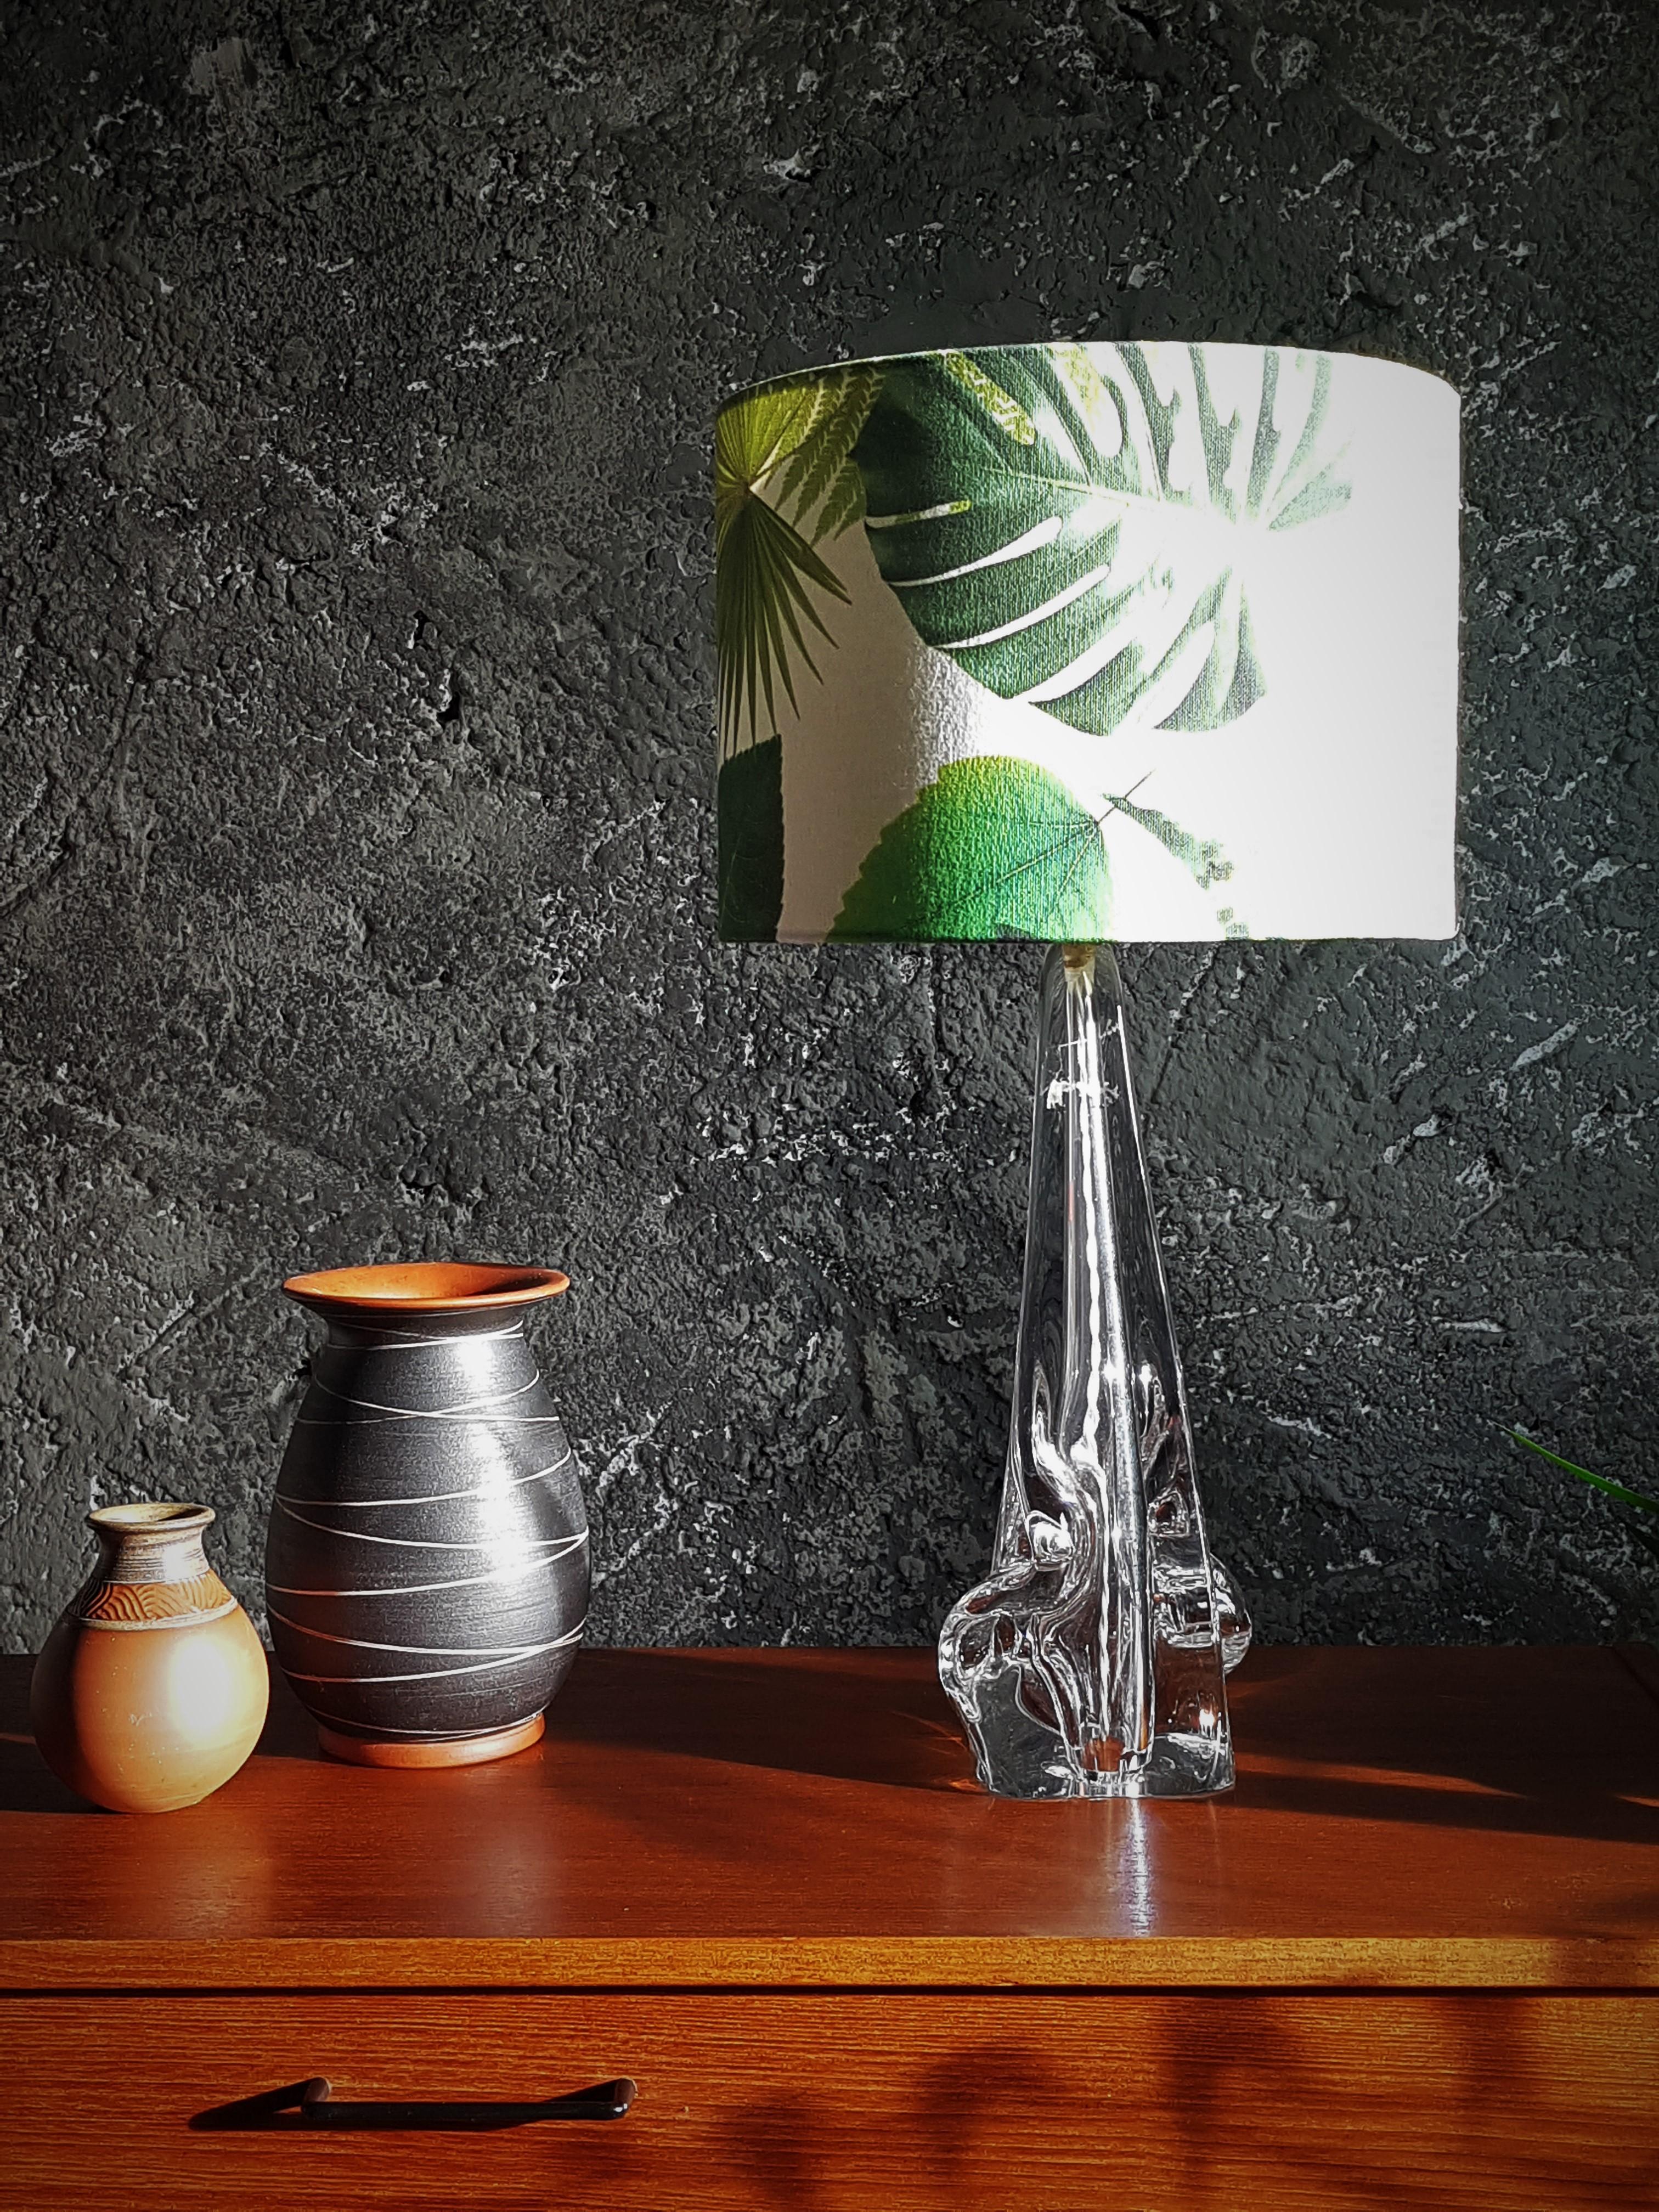 Mid-century table desk lamp, chrystal base with bubbles, France 1960s.

No chips. new shade.

Signed.